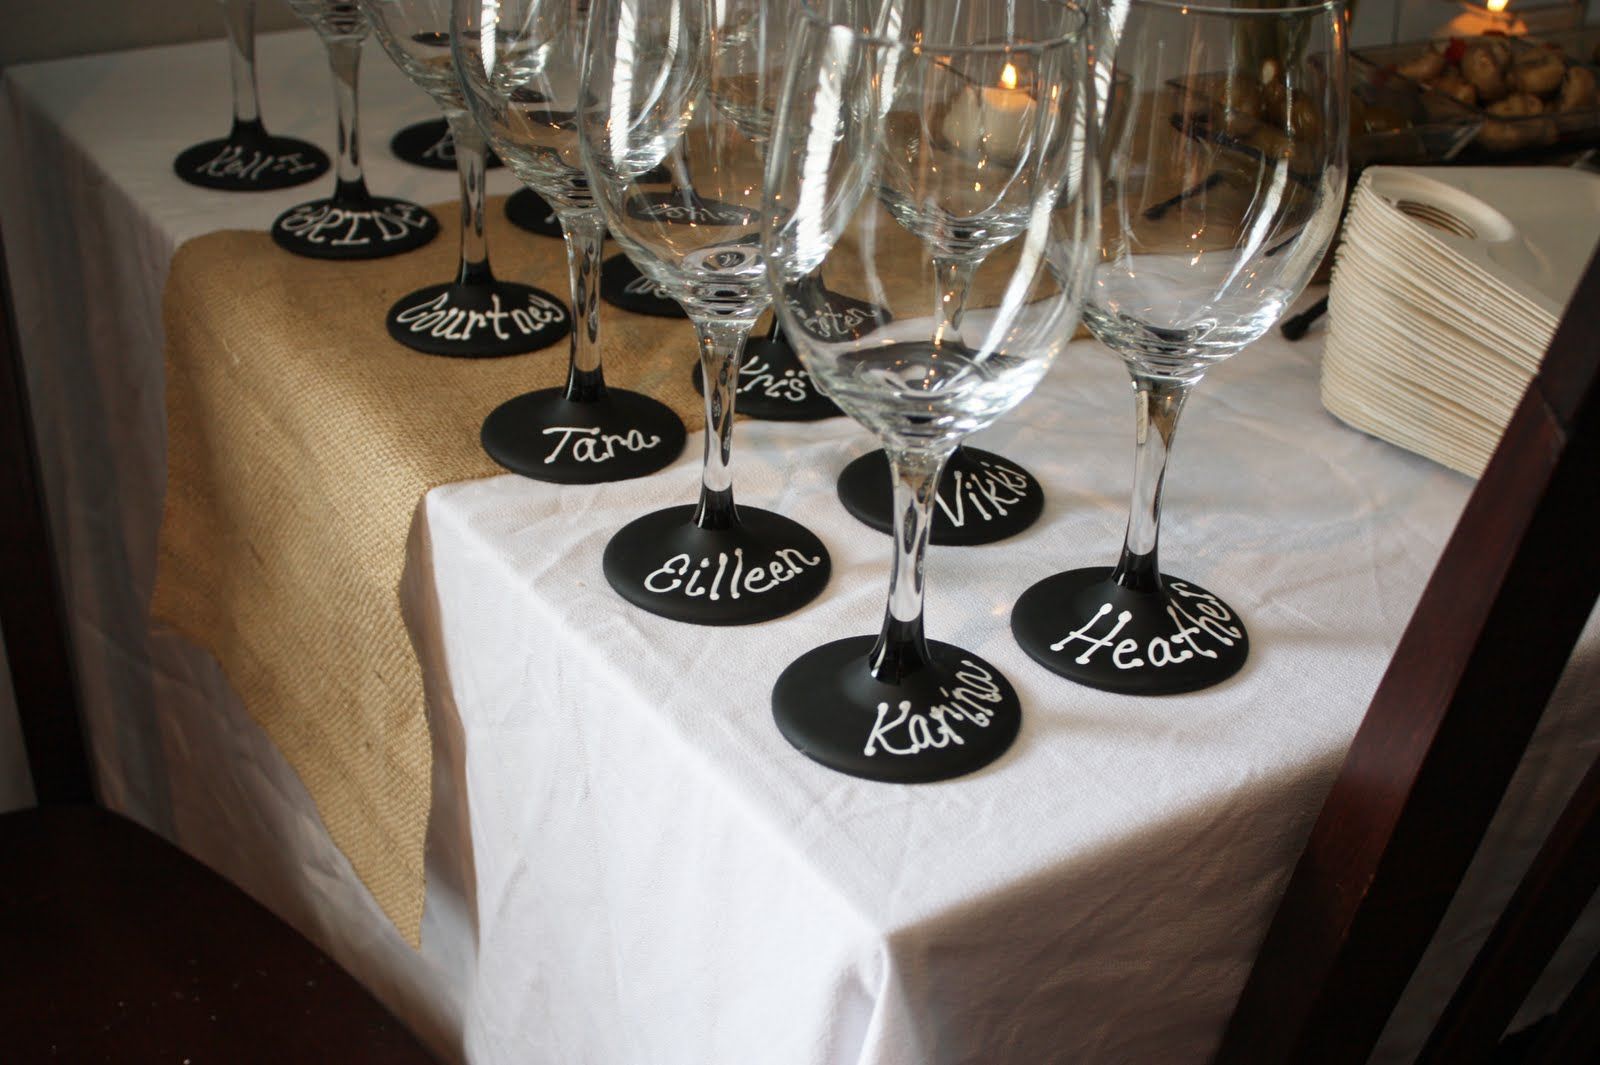 Dollar Tree $1 wine glasses painted with chalkboard paint. Perfect for this wine tasting bridal shower